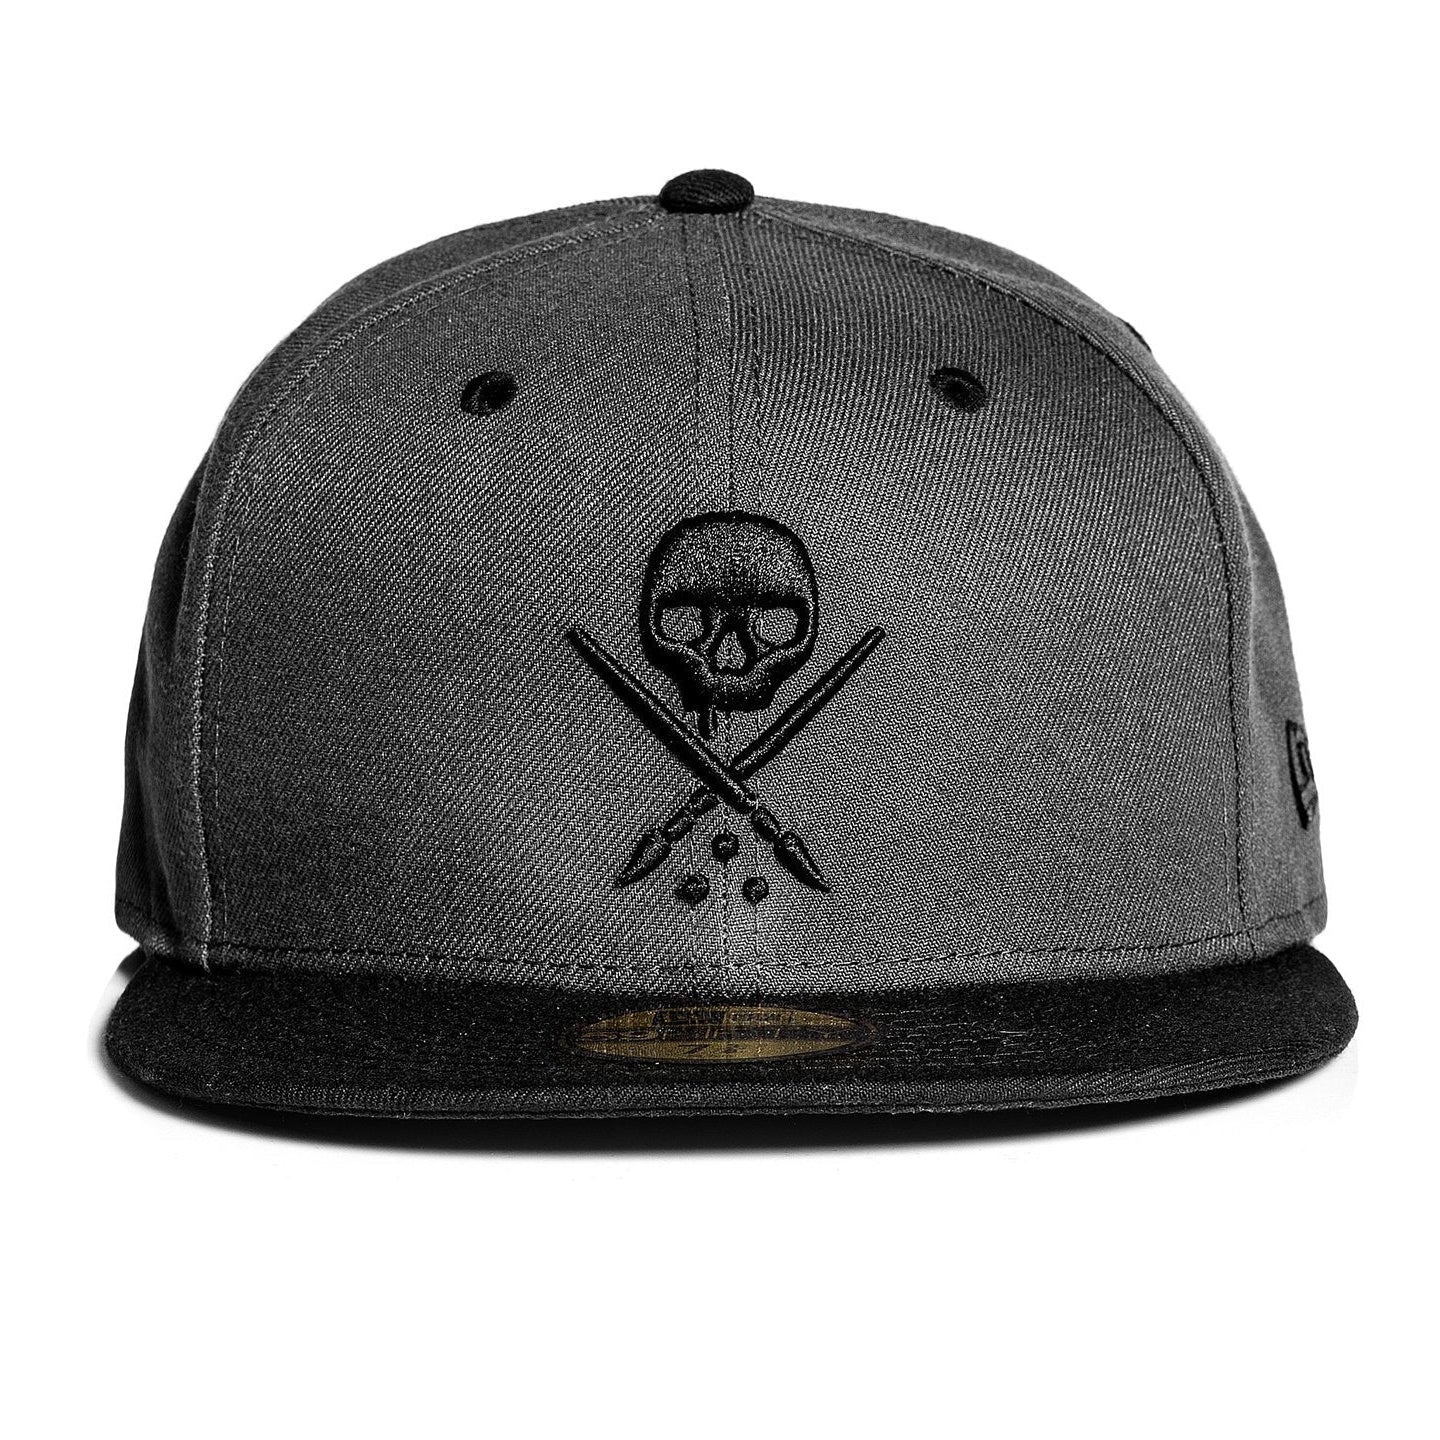 Sullen Badge Eternal Grey Stretched Fitted Cap-Mens Beanies, Hats & Snapback Caps-Scarlett Dawn